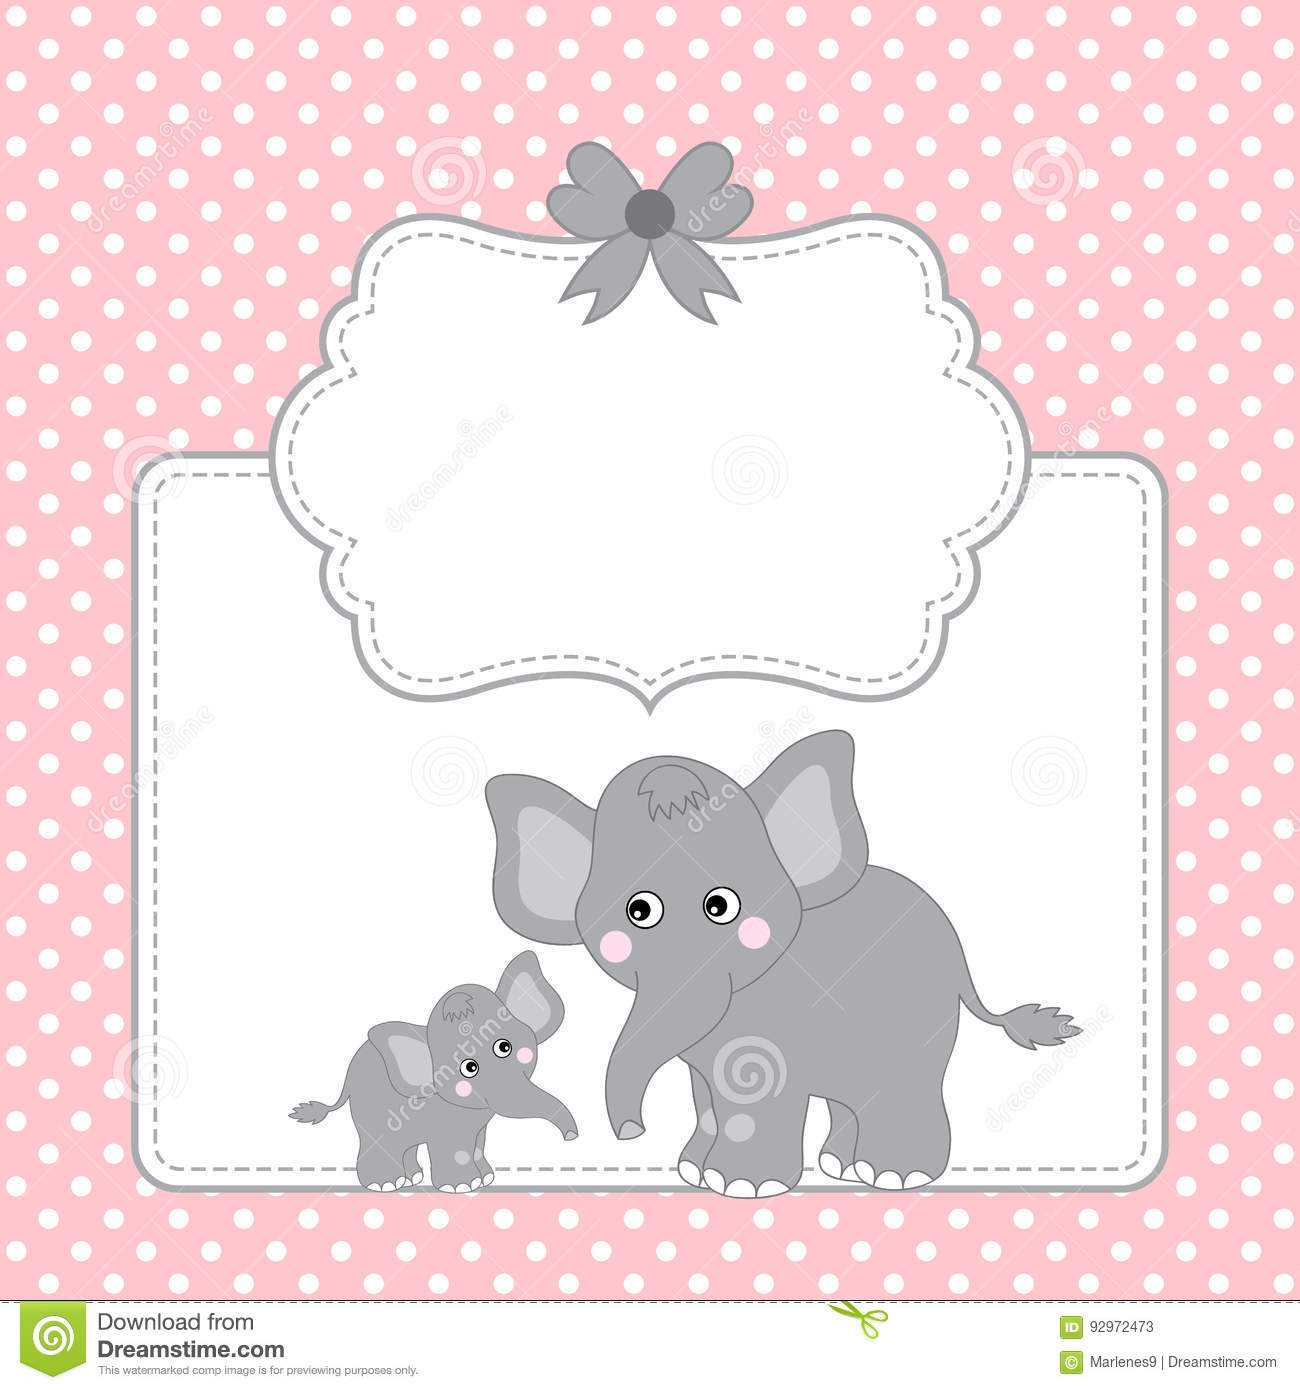 Vector Template Card With Cute Elephants And Polka Dot Throughout Blank Elephant Template